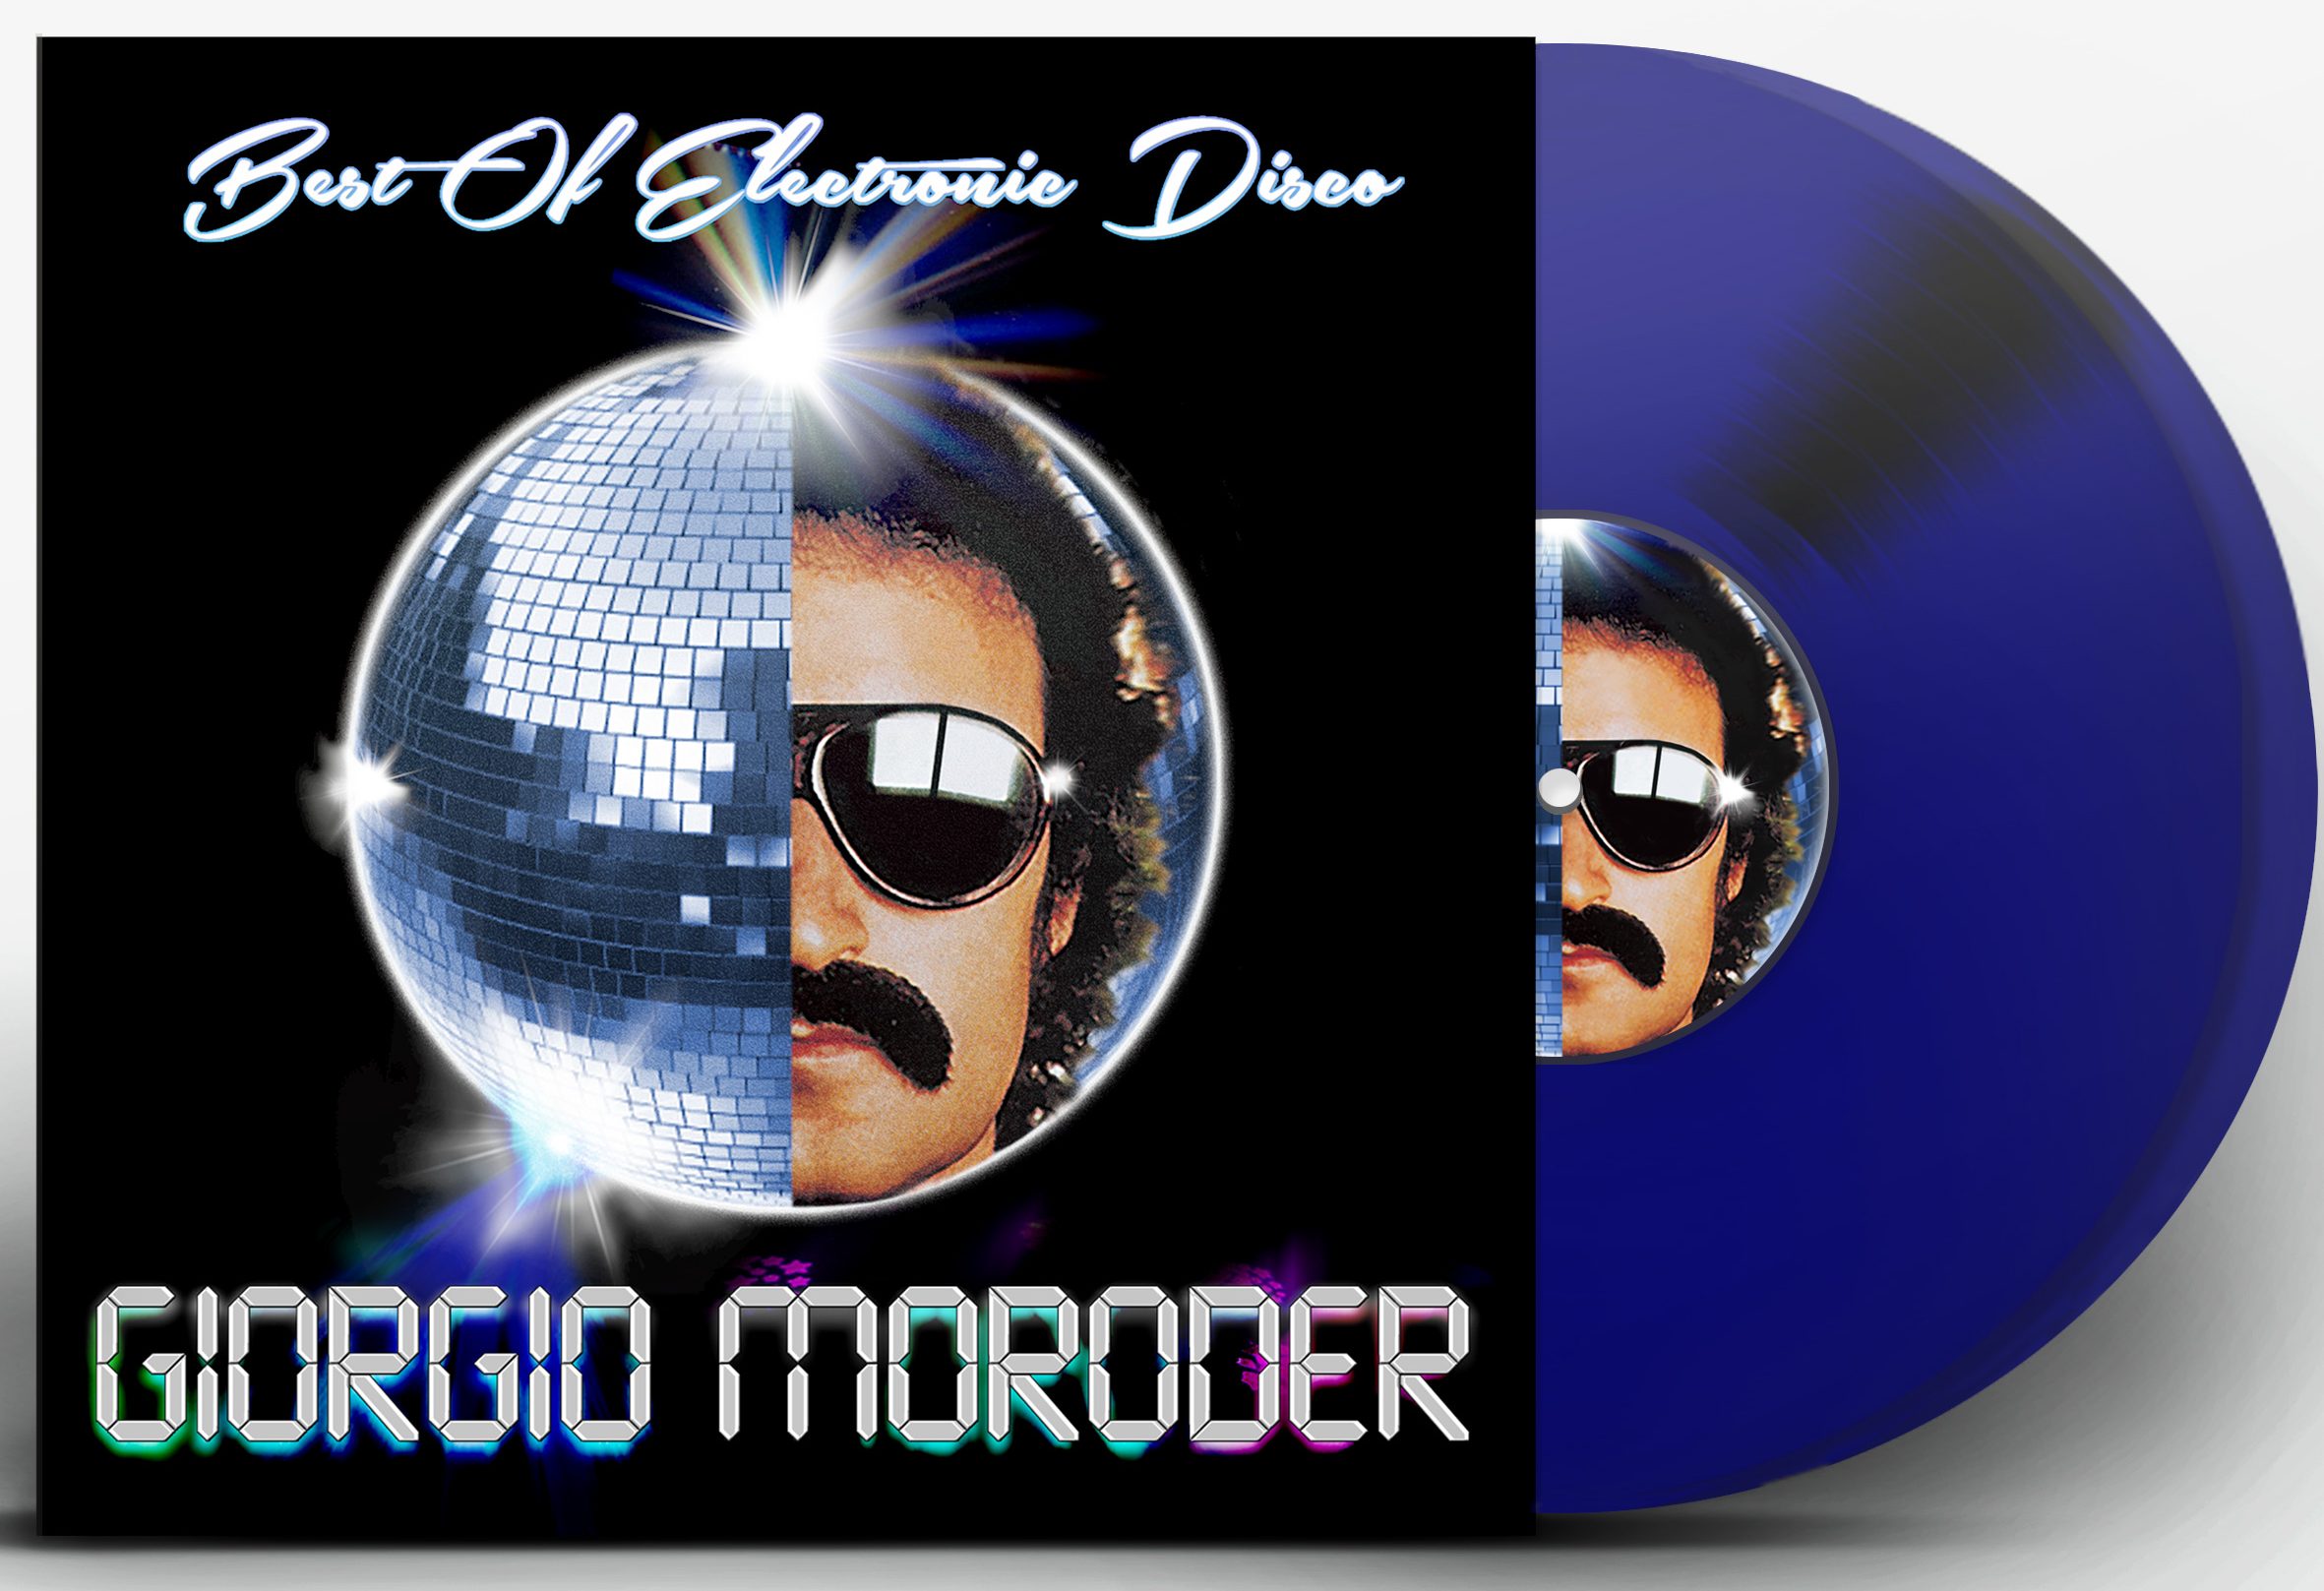 Giorgio Moroder "From Here To Eternity" Blue LP